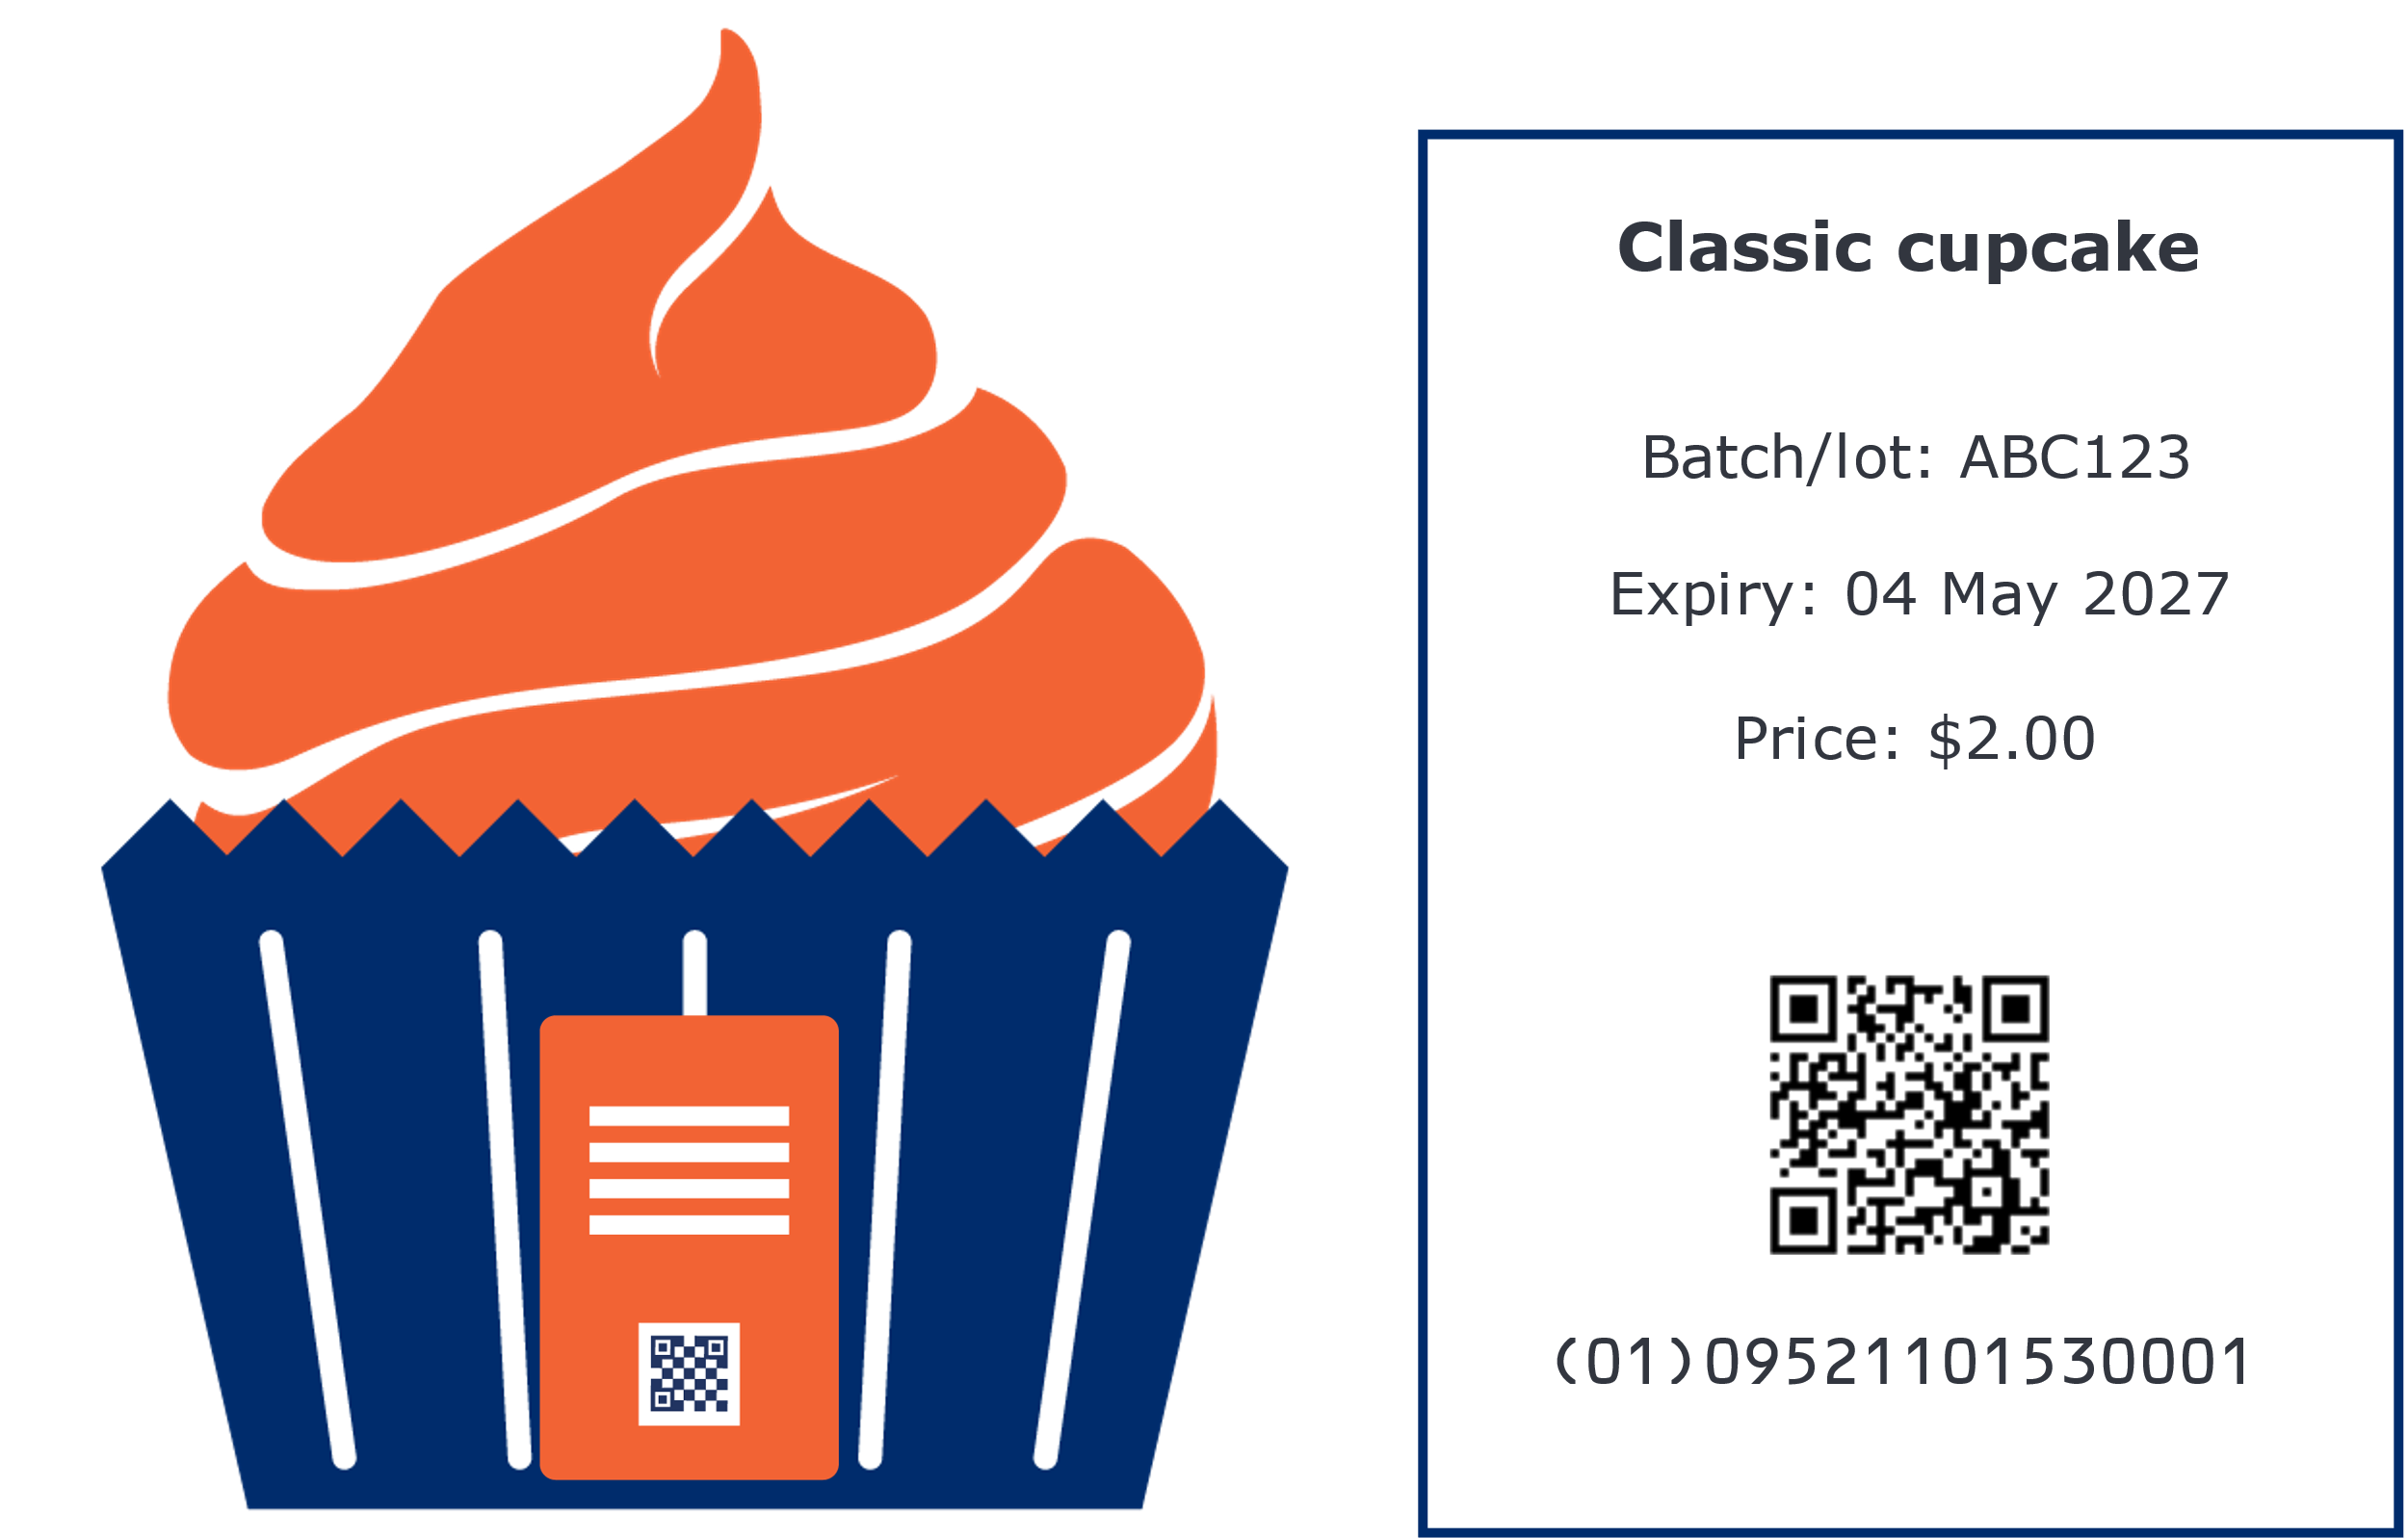 A depiction of a cup cake. The label includes batch/lot, expiry date  and price as well as the GTIN in a QR Code with GS1 Digital Link syntax.